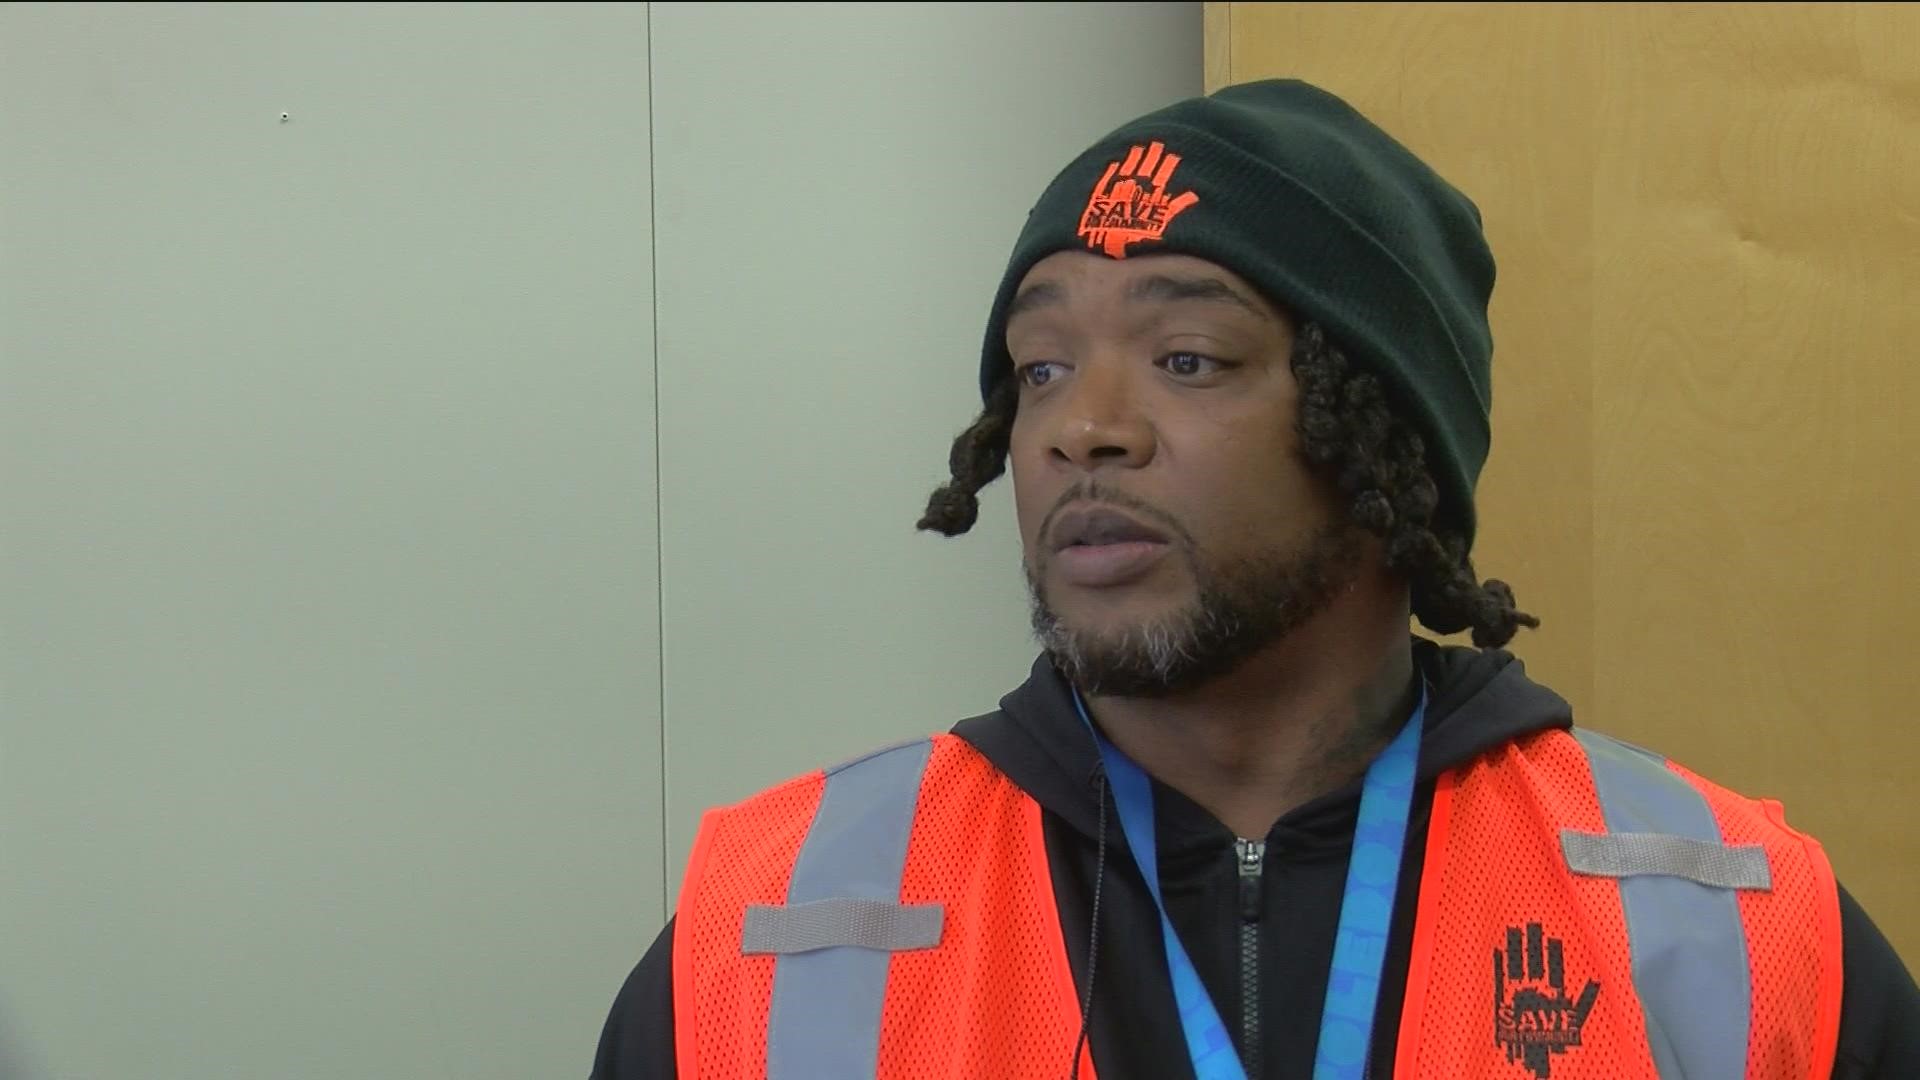 Neiko McIntyre's father, Christopher, said the violence involving young people in Toledo has gotten out of hand. So, he joined Save our Community.